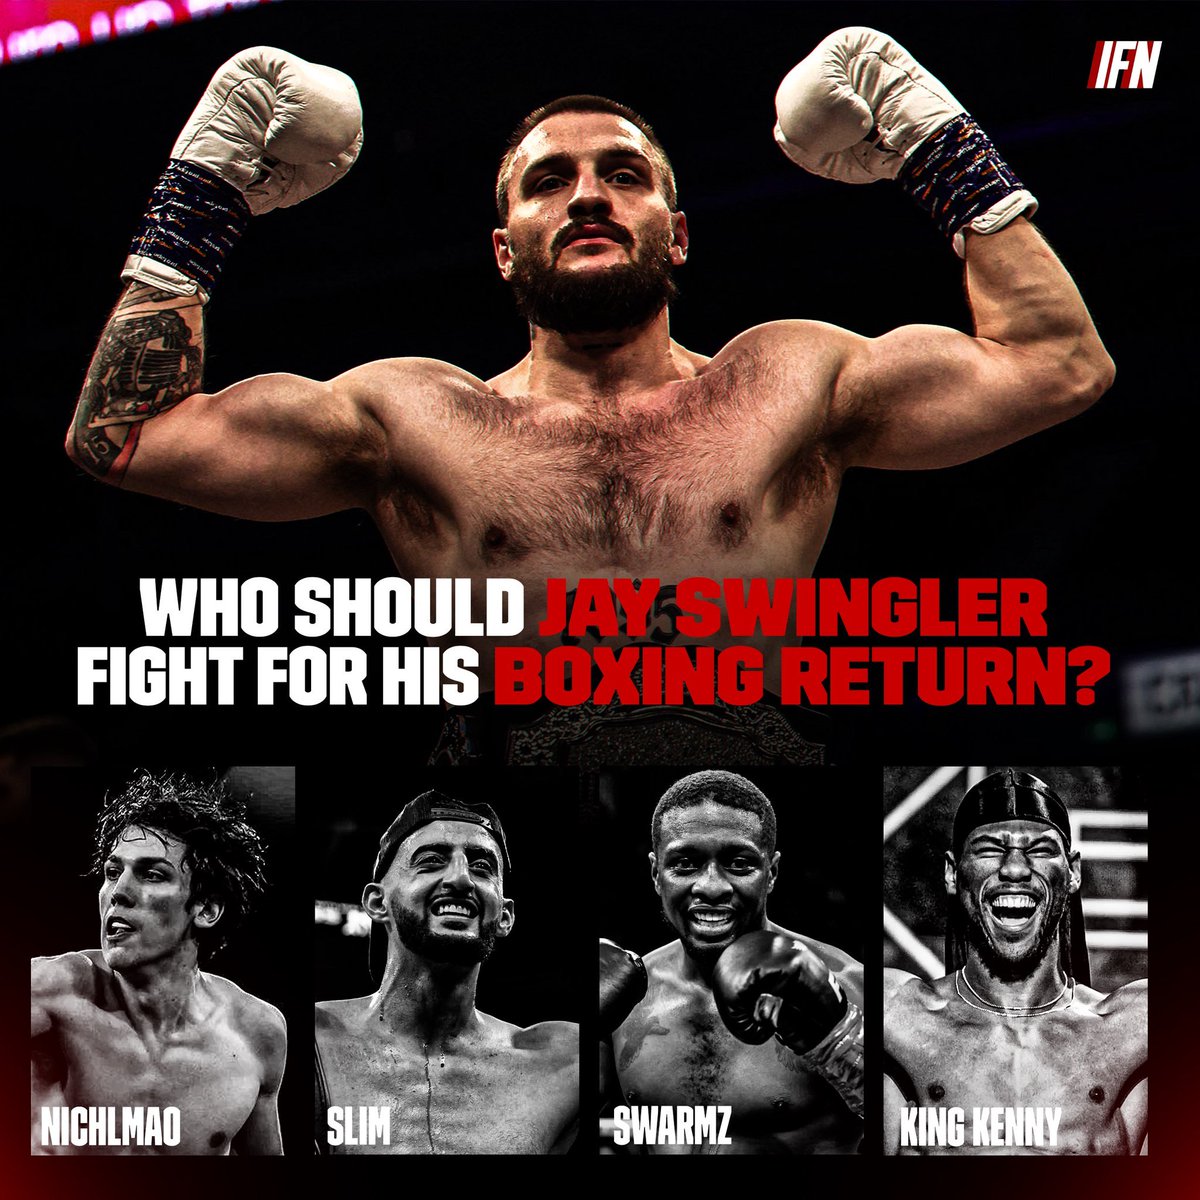 ‼️ 𝐂𝐎𝐌𝐌𝐔𝐍𝐈𝐓𝐘 𝐐𝐔𝐄𝐒𝐓𝐈𝐎𝐍 ‼️

Following the emergence of new training footage, who do you think Jay Swingler should face ahead of POTENTIAL boxing return ❓👀